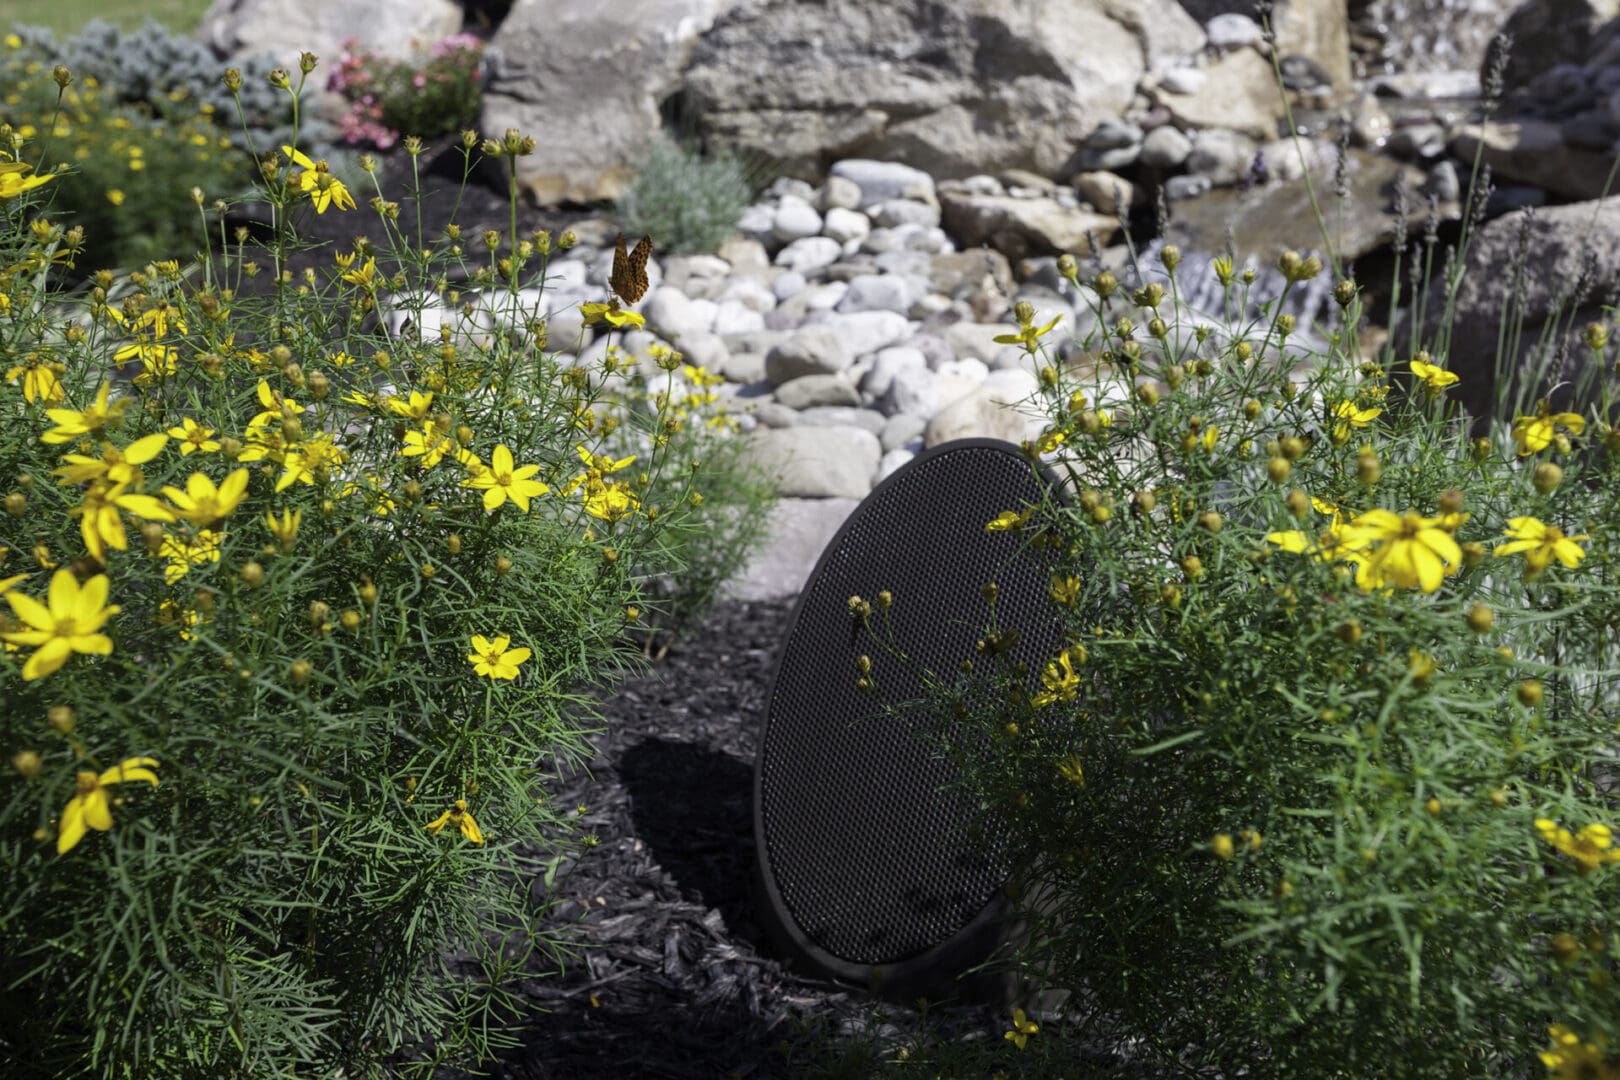 A rock garden with yellow flowers and rocks transformed by captivating outdoor lighting.